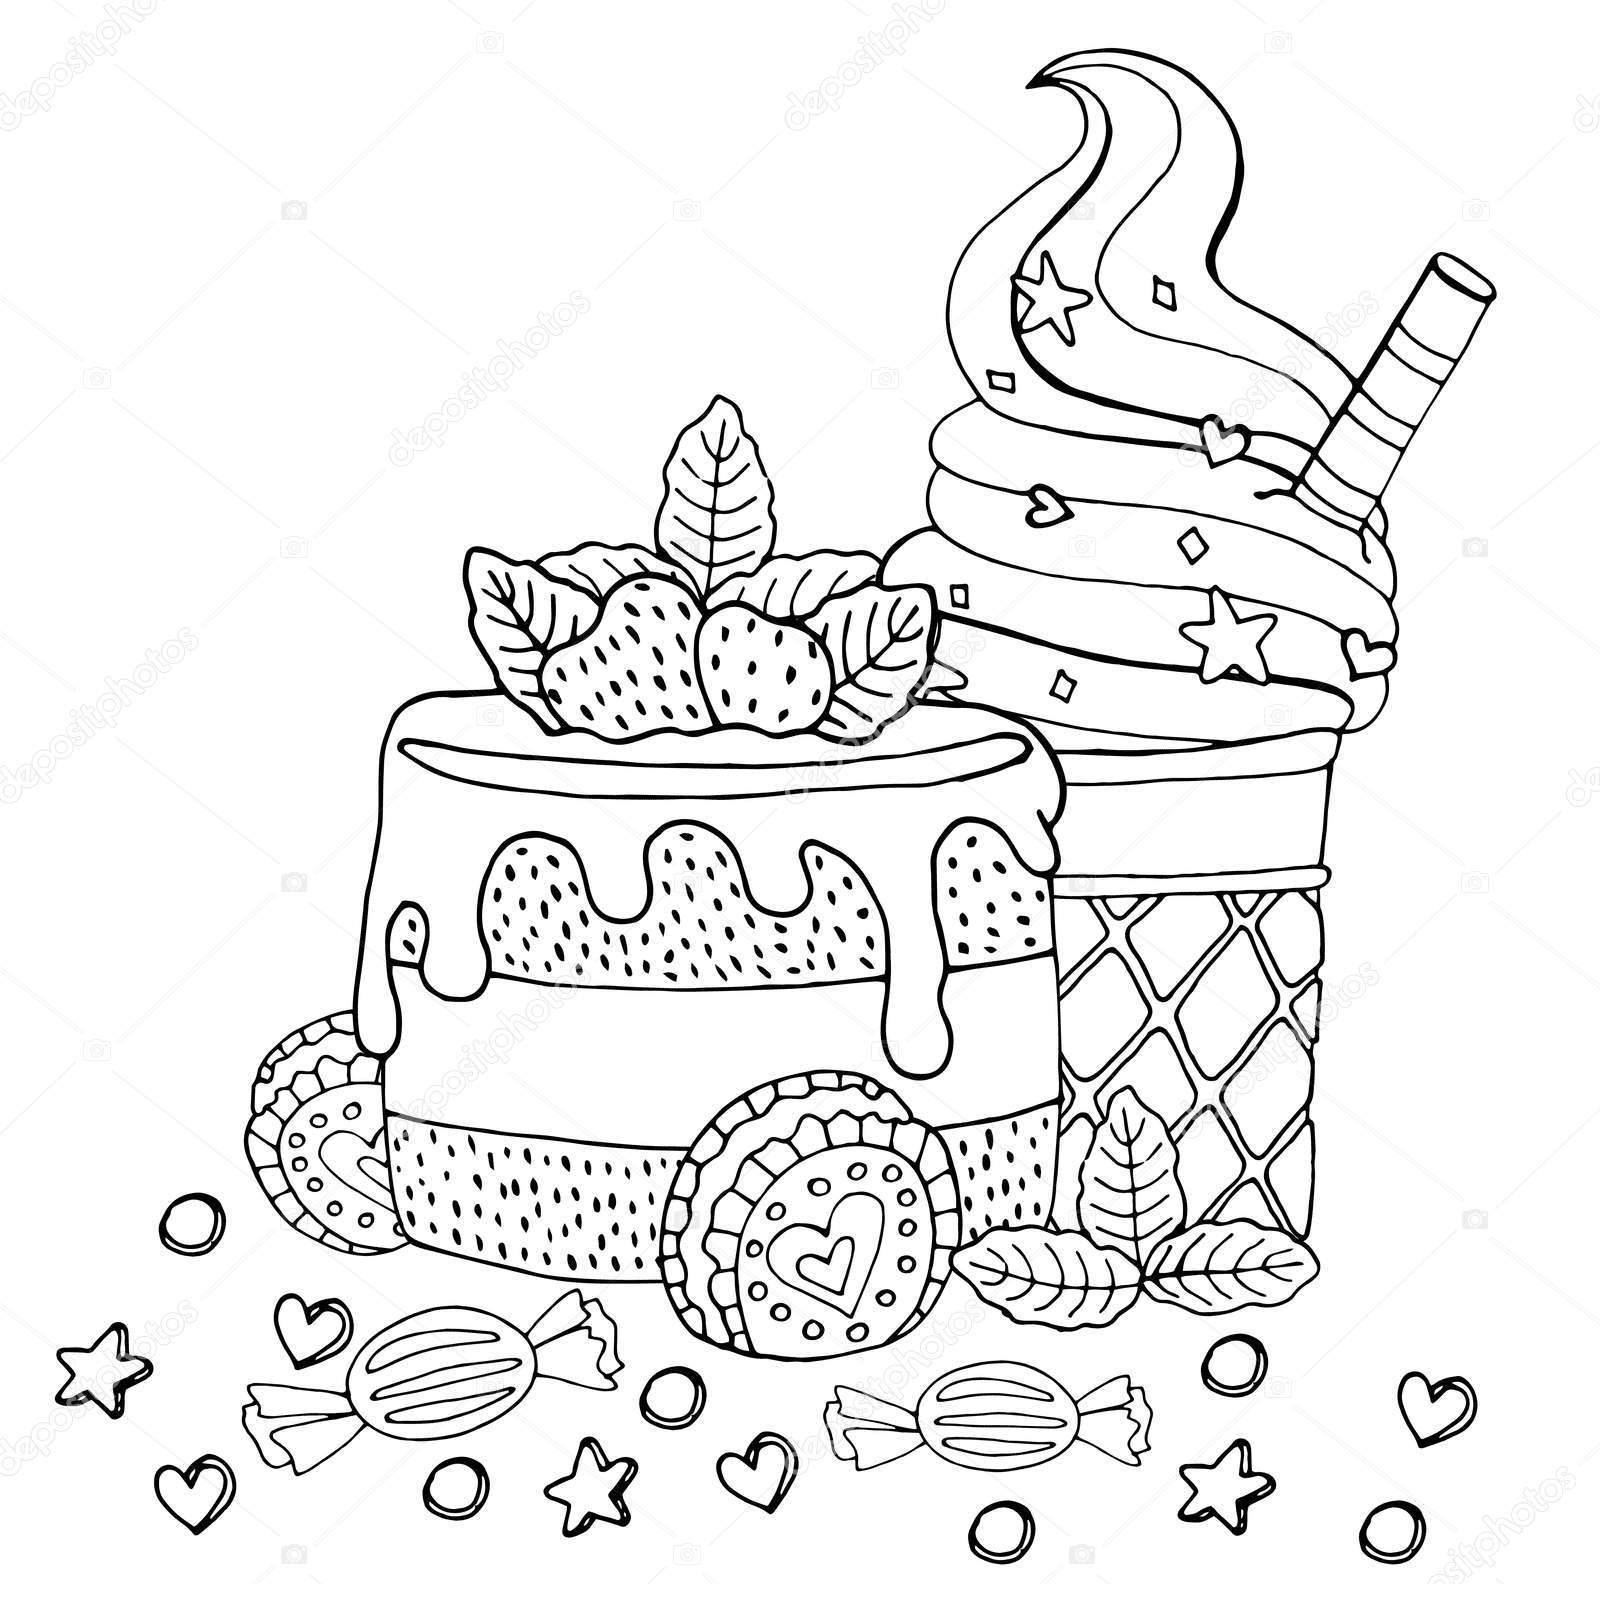 Cake with Cupcake, Candy and Ice cream Coloring Pages